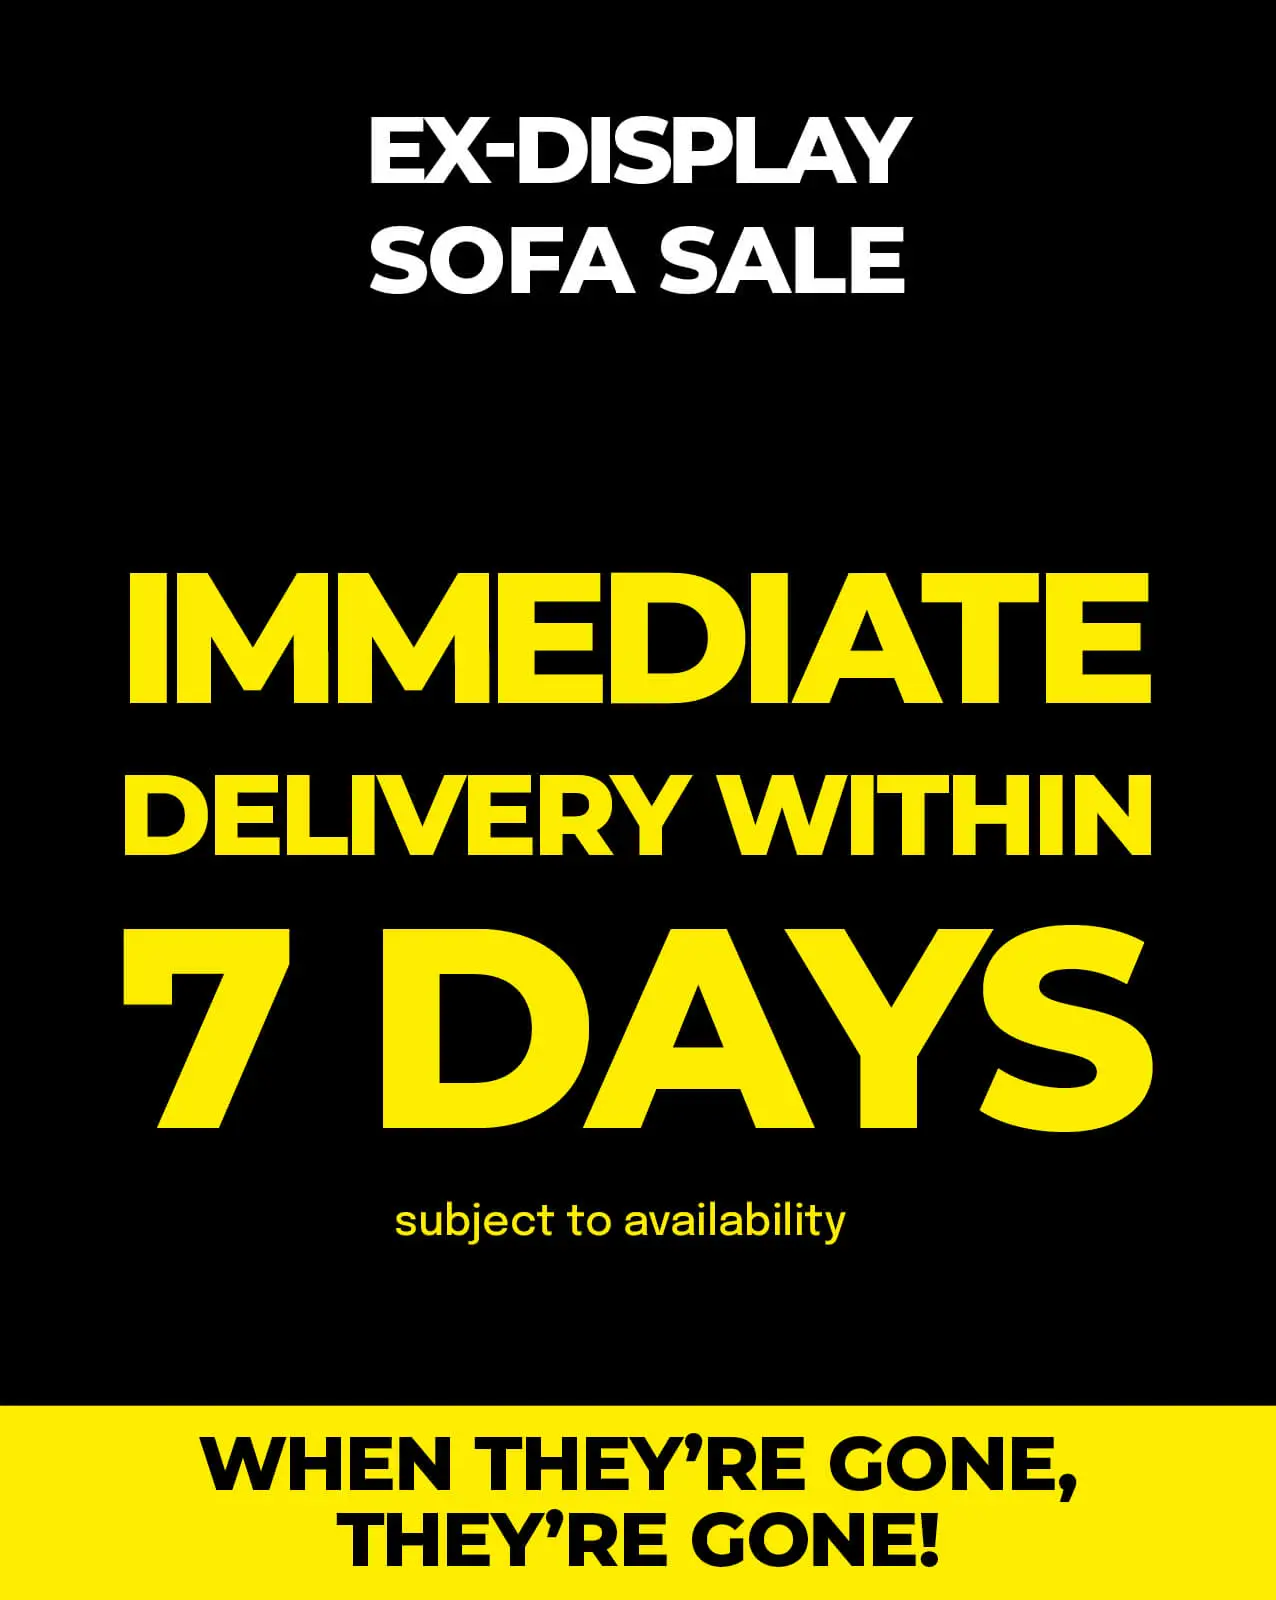 Ex-display sofa sale, immediate delivery within 7 days. When they're gone, they're gone!